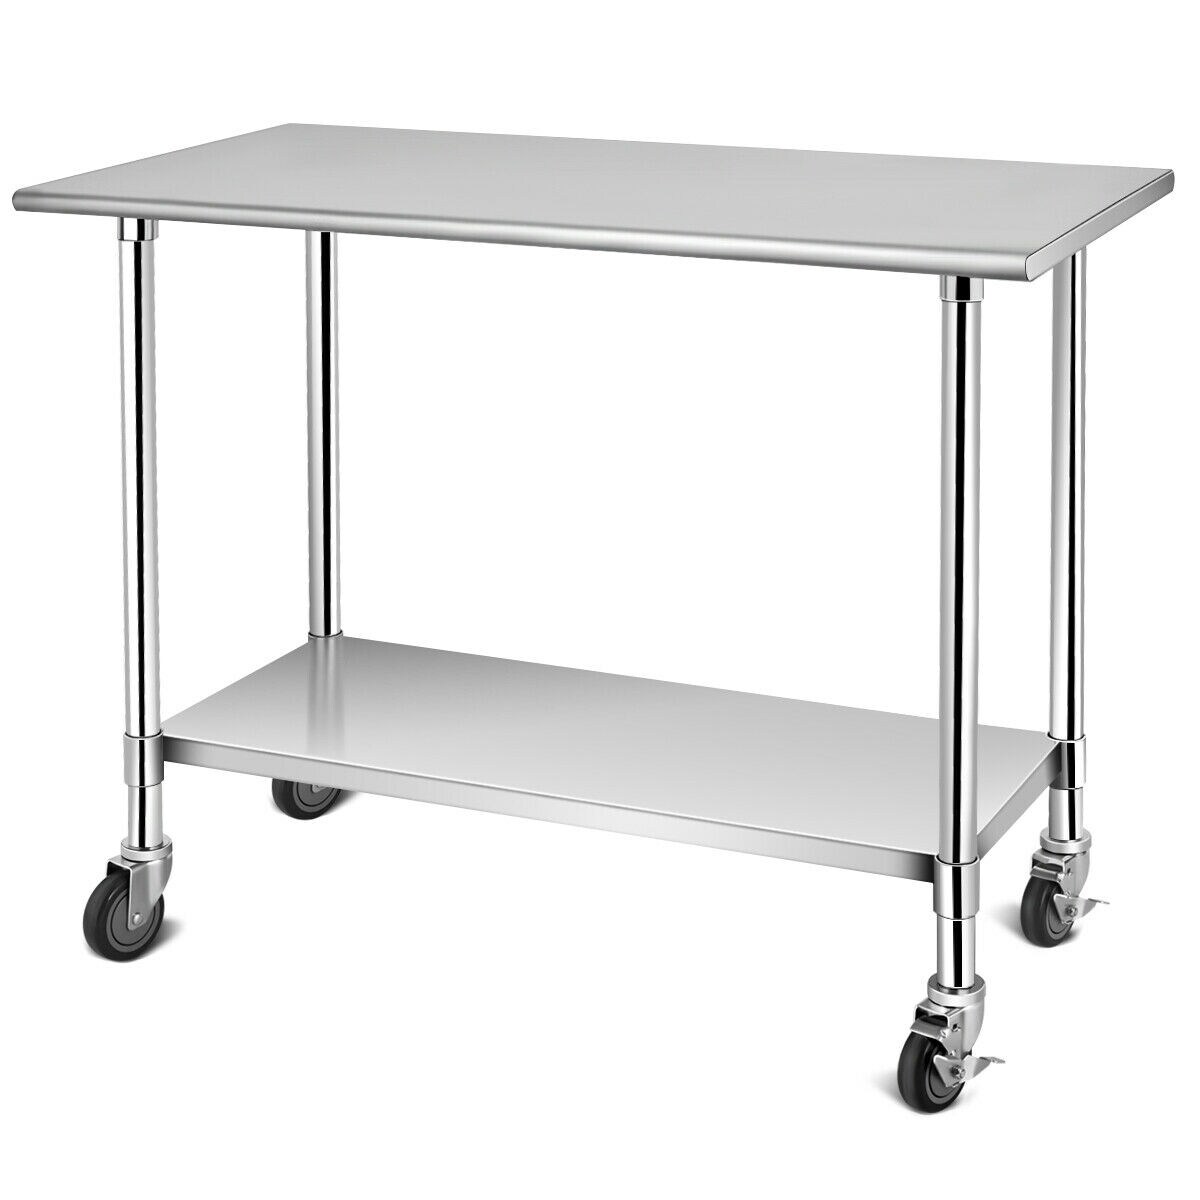 Shop Black Friday Deals On Nsf Stainless Steel Commercial Kitchen Prep Work Table Silver One Size Overstock 31803934